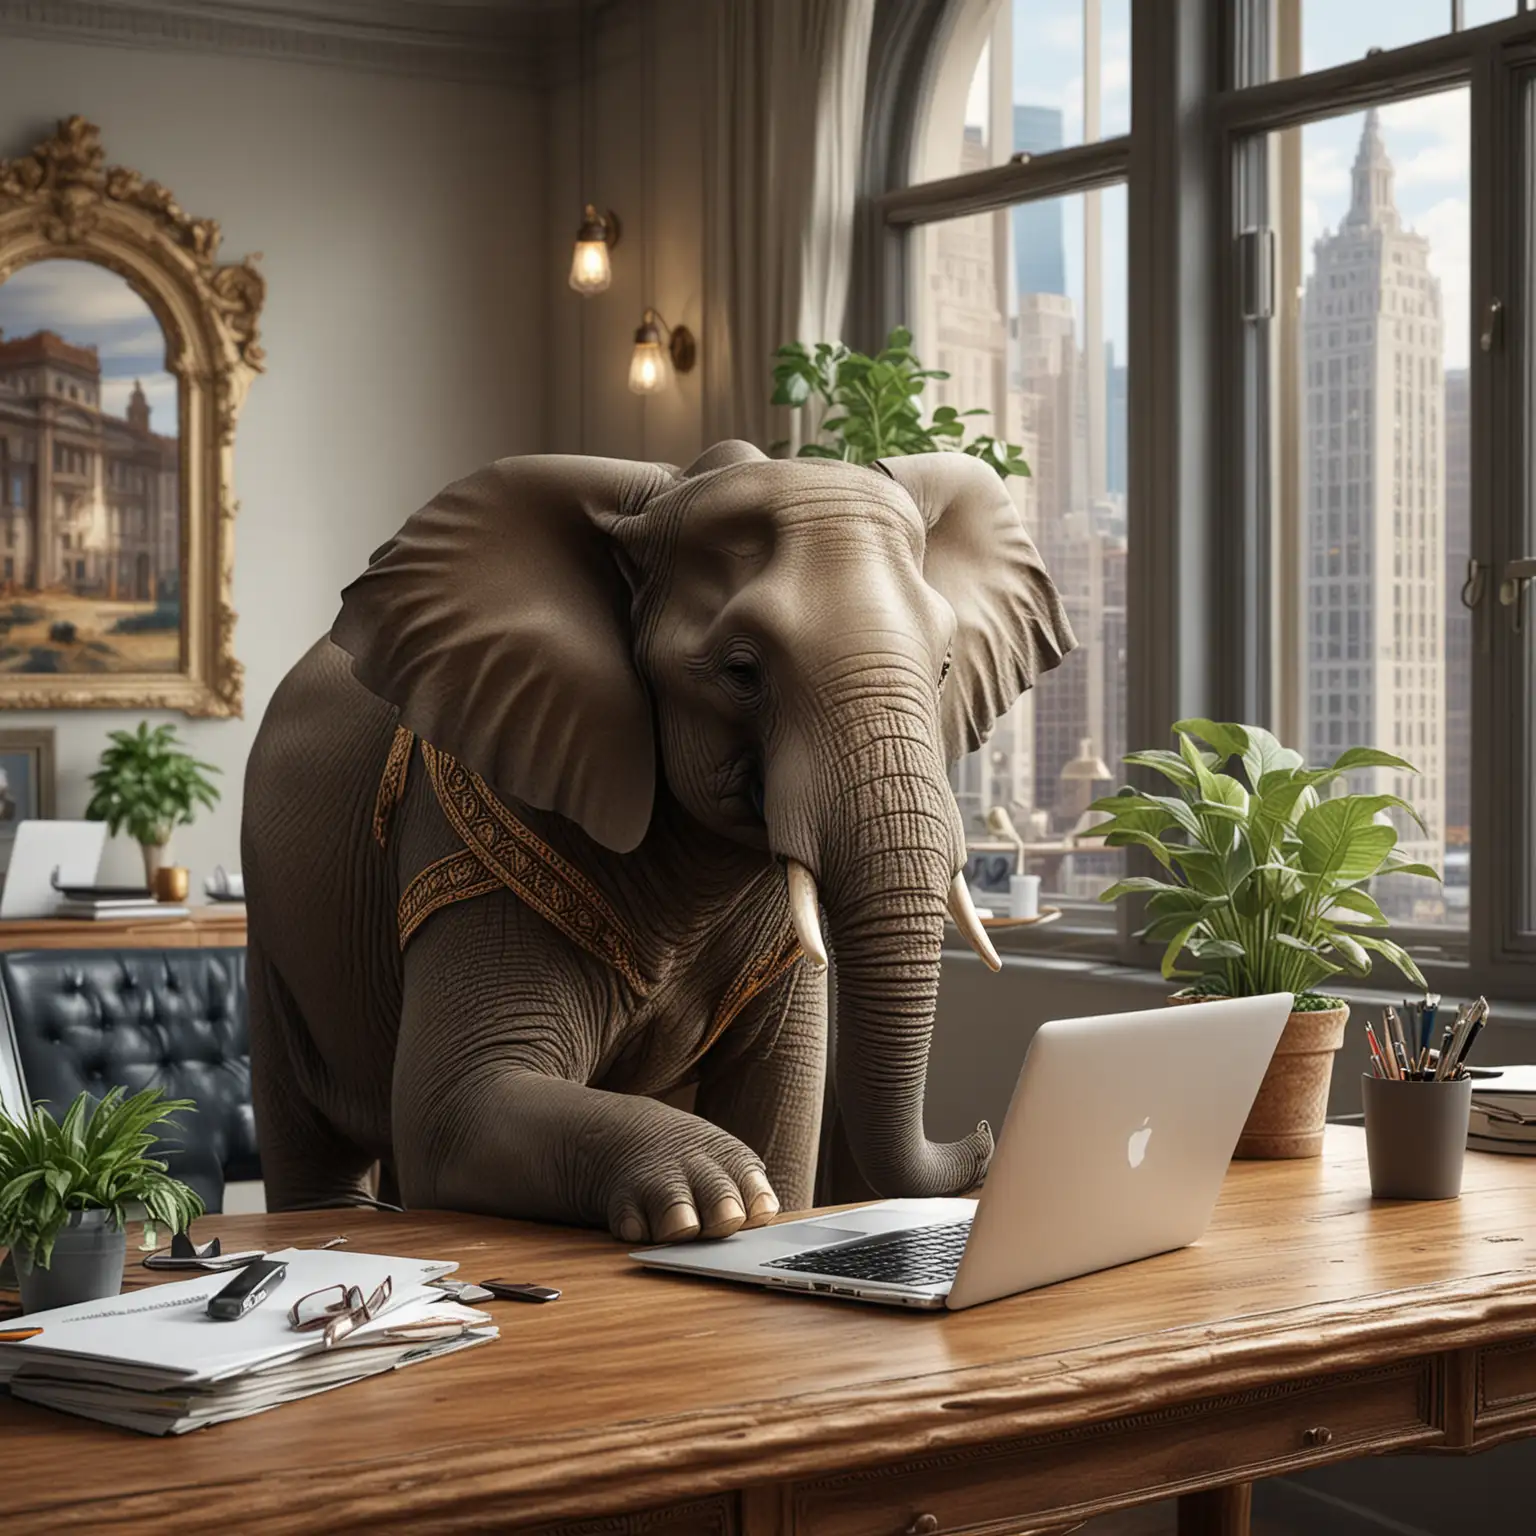 Generate a photo realistic image of an elephant working on a laptop at an ornate desk in an office environment. The elephant should appear engaged with a laptop computer placed on the desk, as if it's deeply focused on its work. 

The office space includes large windows that provide a view of the city skyline outside. plants and natural elements around the office space. eye level perspective. create detailed elements that add interest. rich and robust color. 